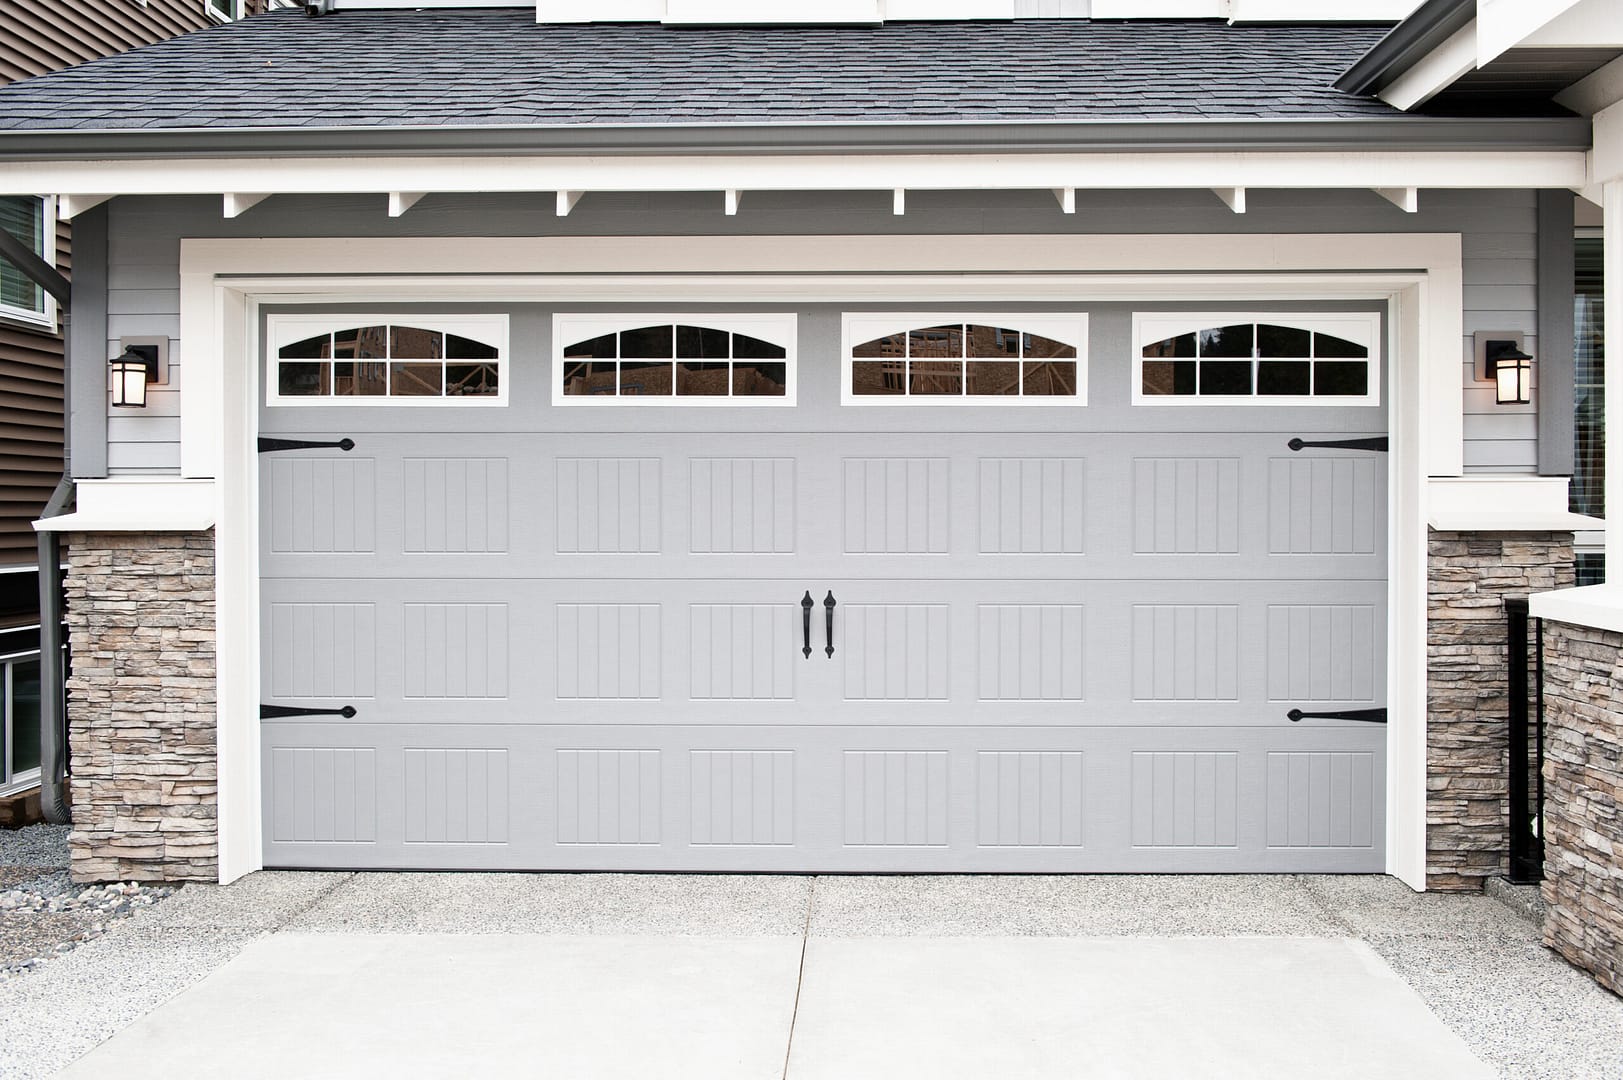 Exterior view of a garage door showing a perfect installation on a suburban home. Enhance your online presence with local splash's expert digital strategies for garage door installers.